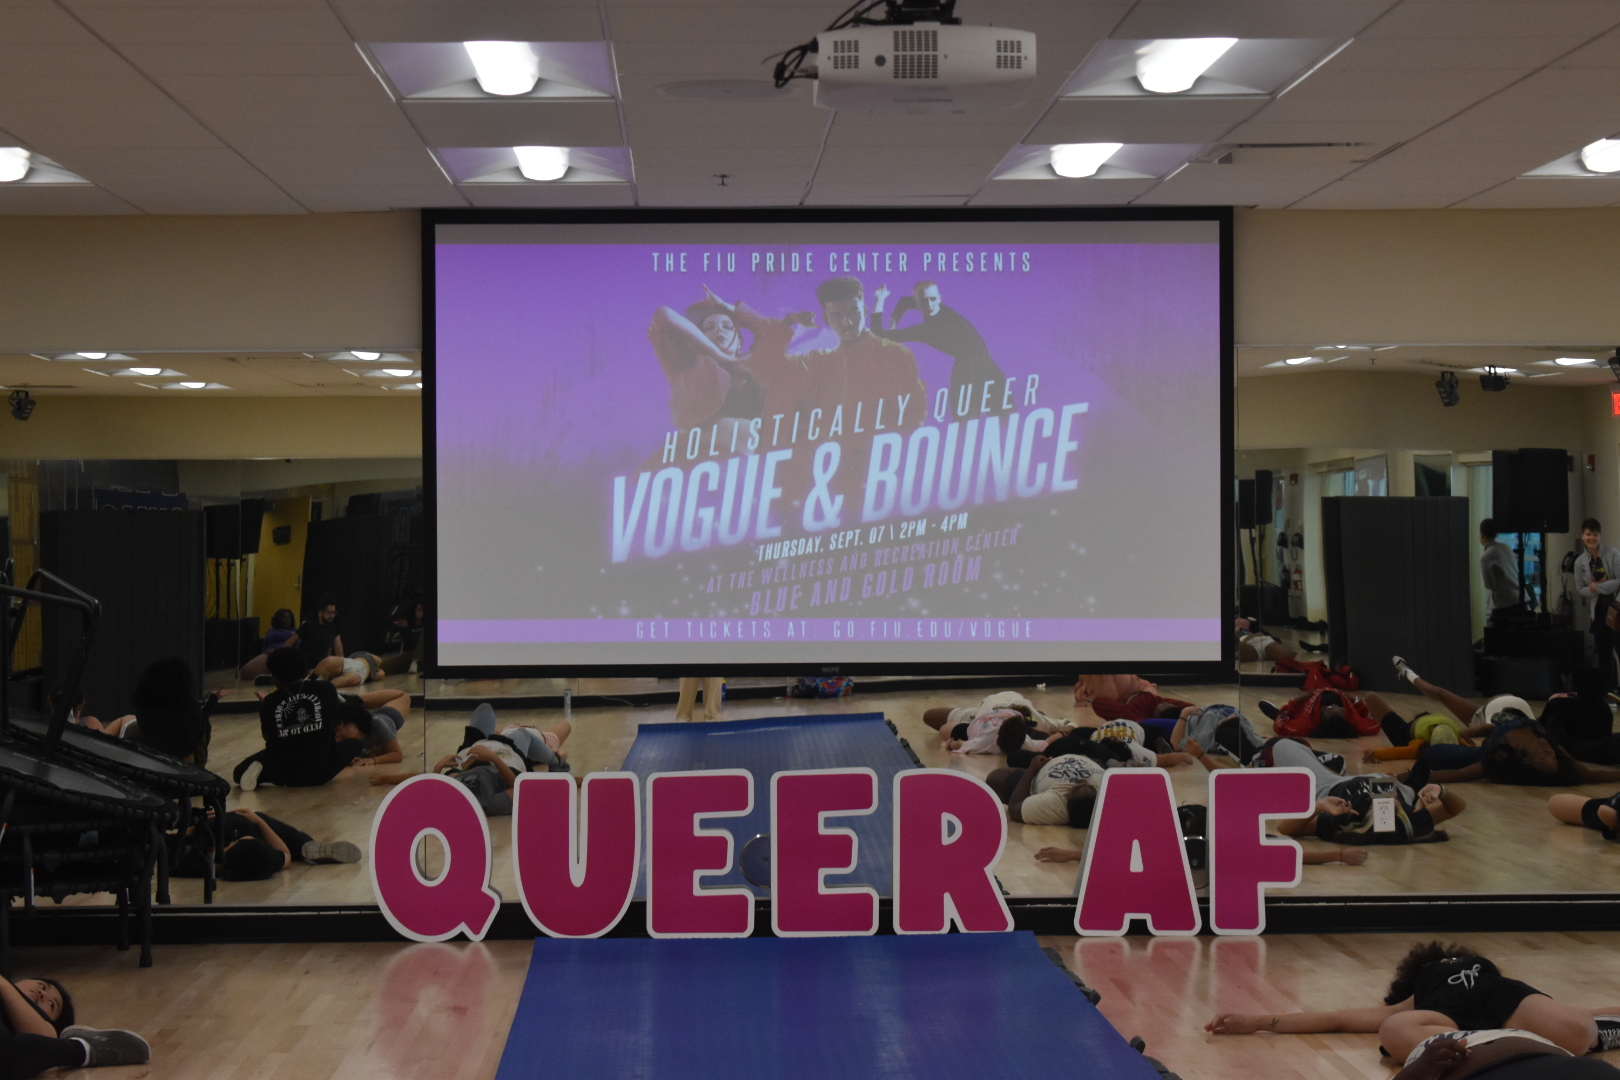 Vogue and Bounce Queer Dance event poster